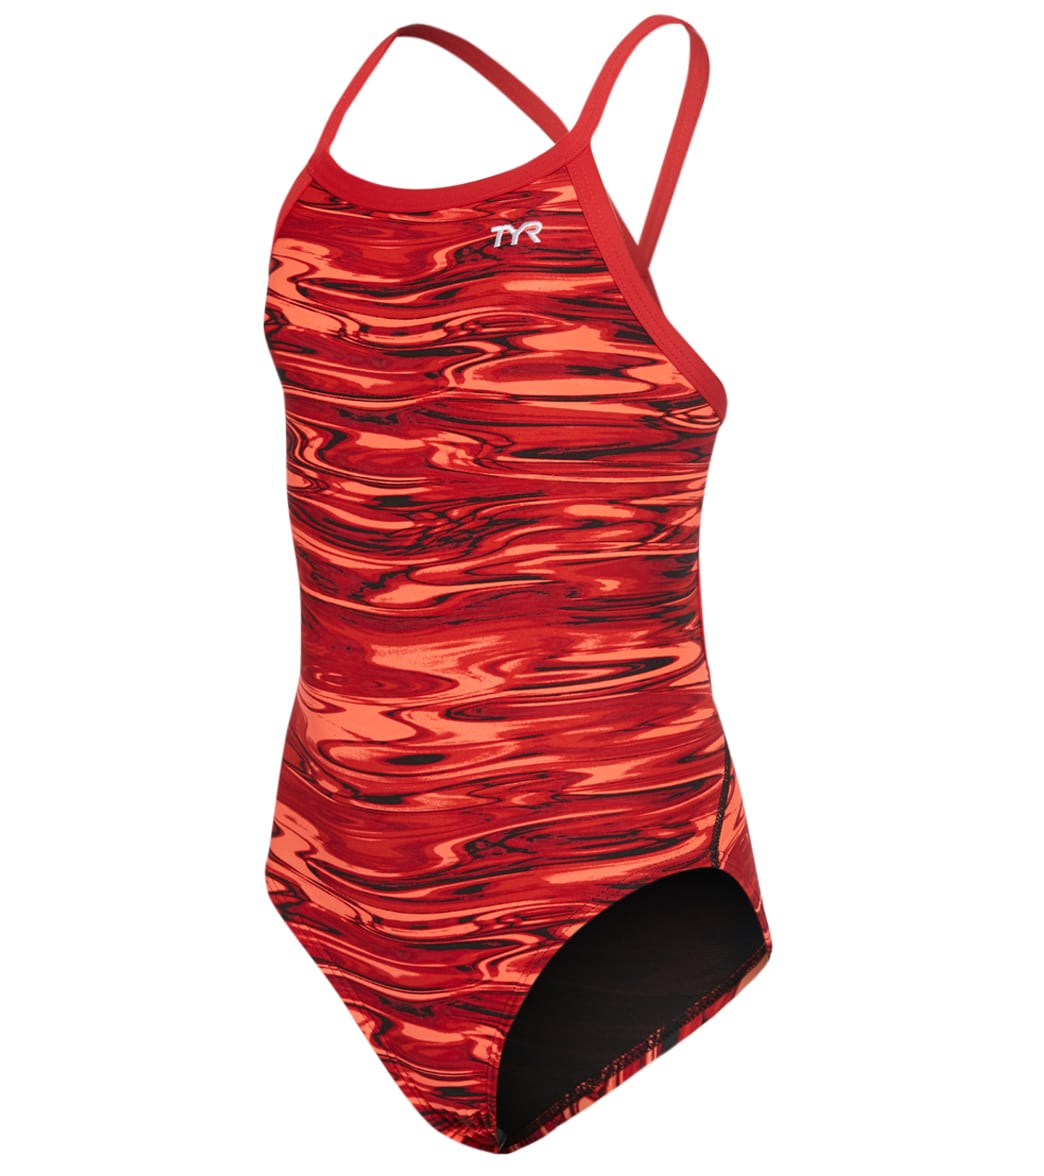 TYR Girls' Hydra Diamondfit One Piece Swimsuit - Red 22 - Swimoutlet.com